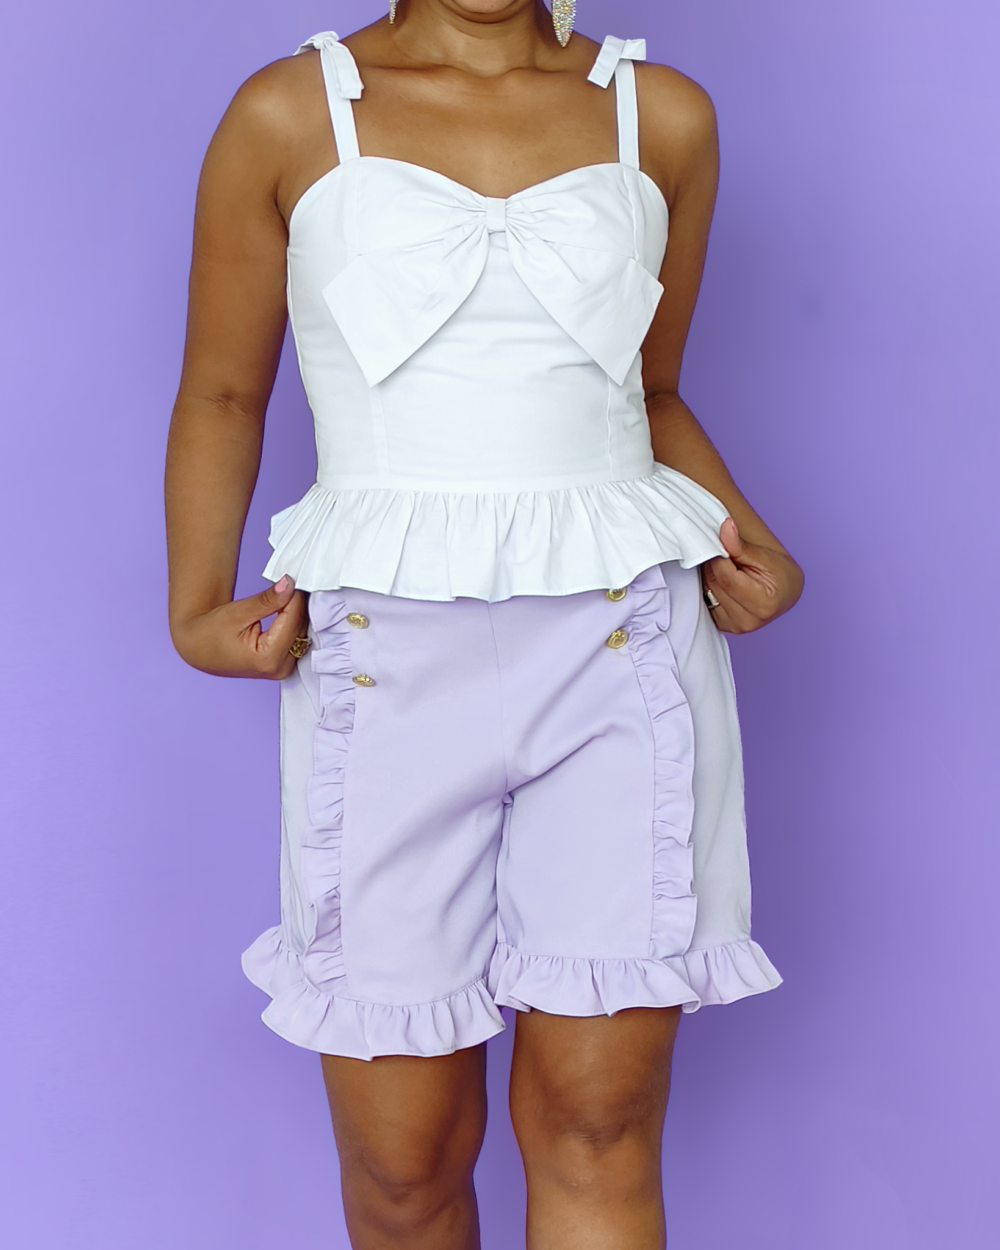 Model wearing lavender sailor shorts, with side zipper, back pockets and ruffles everywhere.